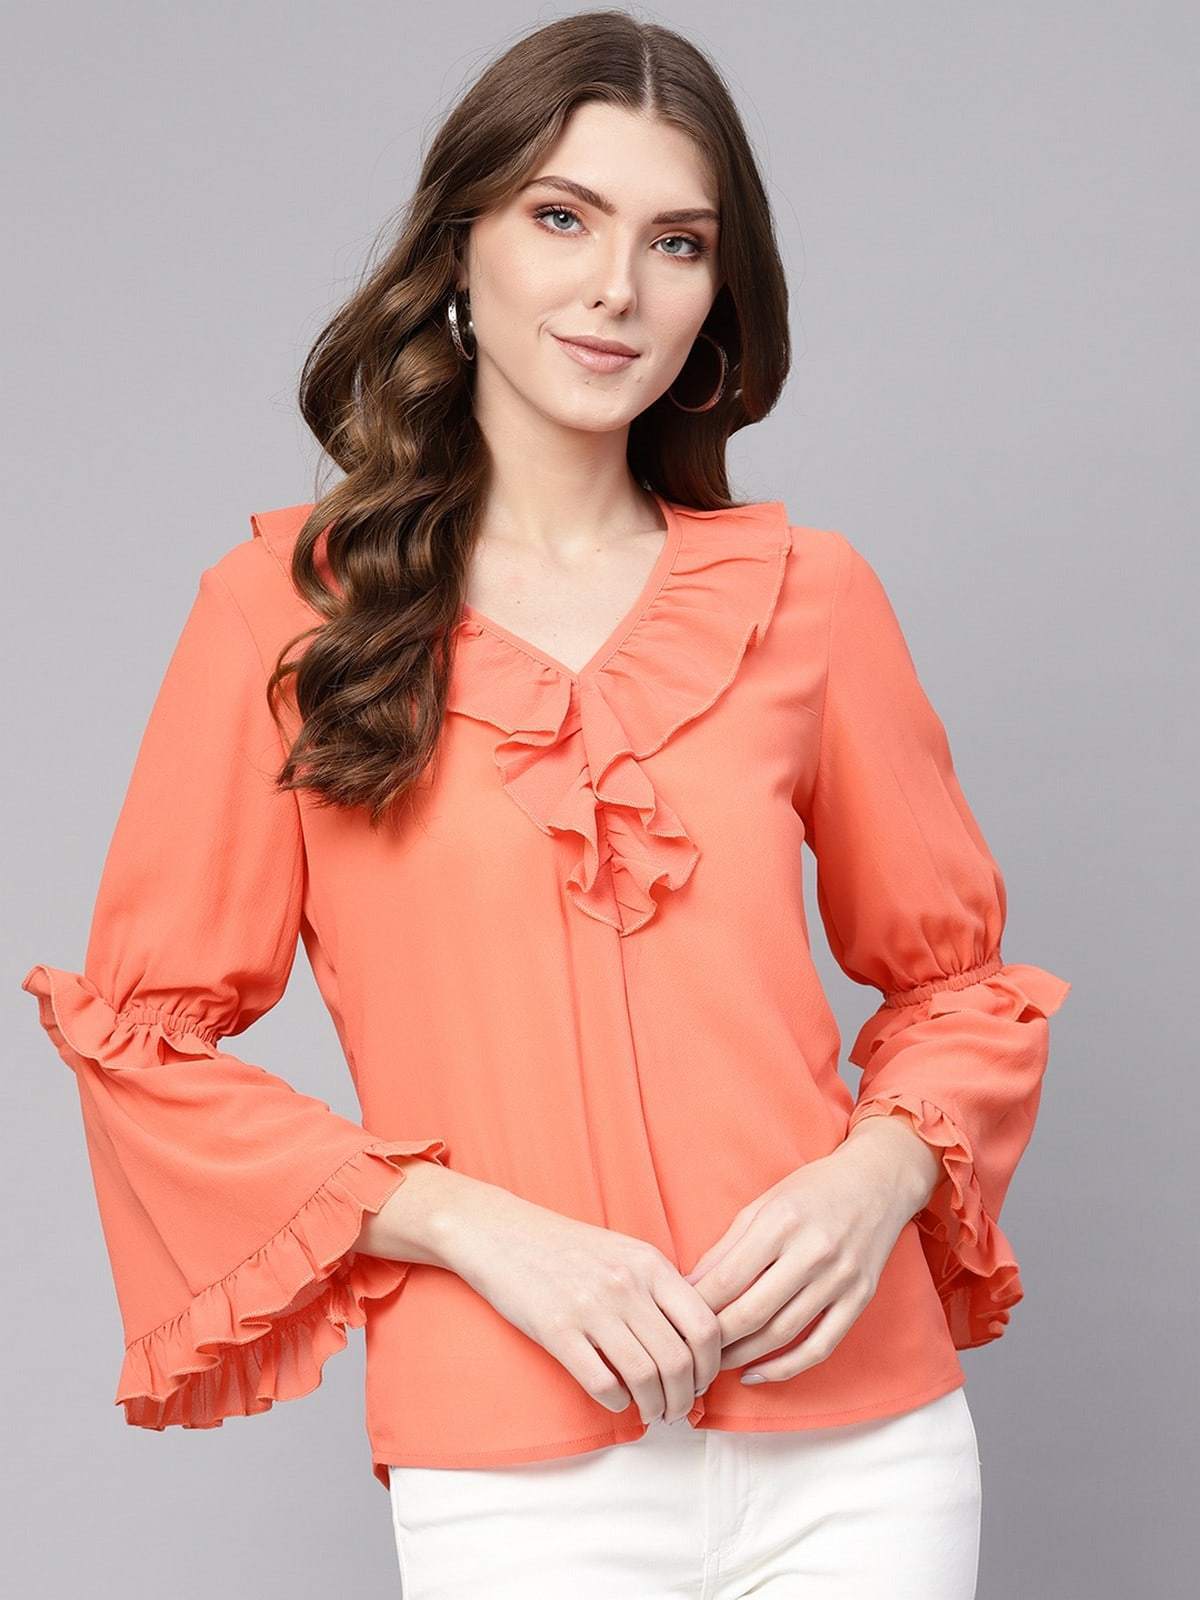 Women's Solid Linear Frill Top - Pannkh